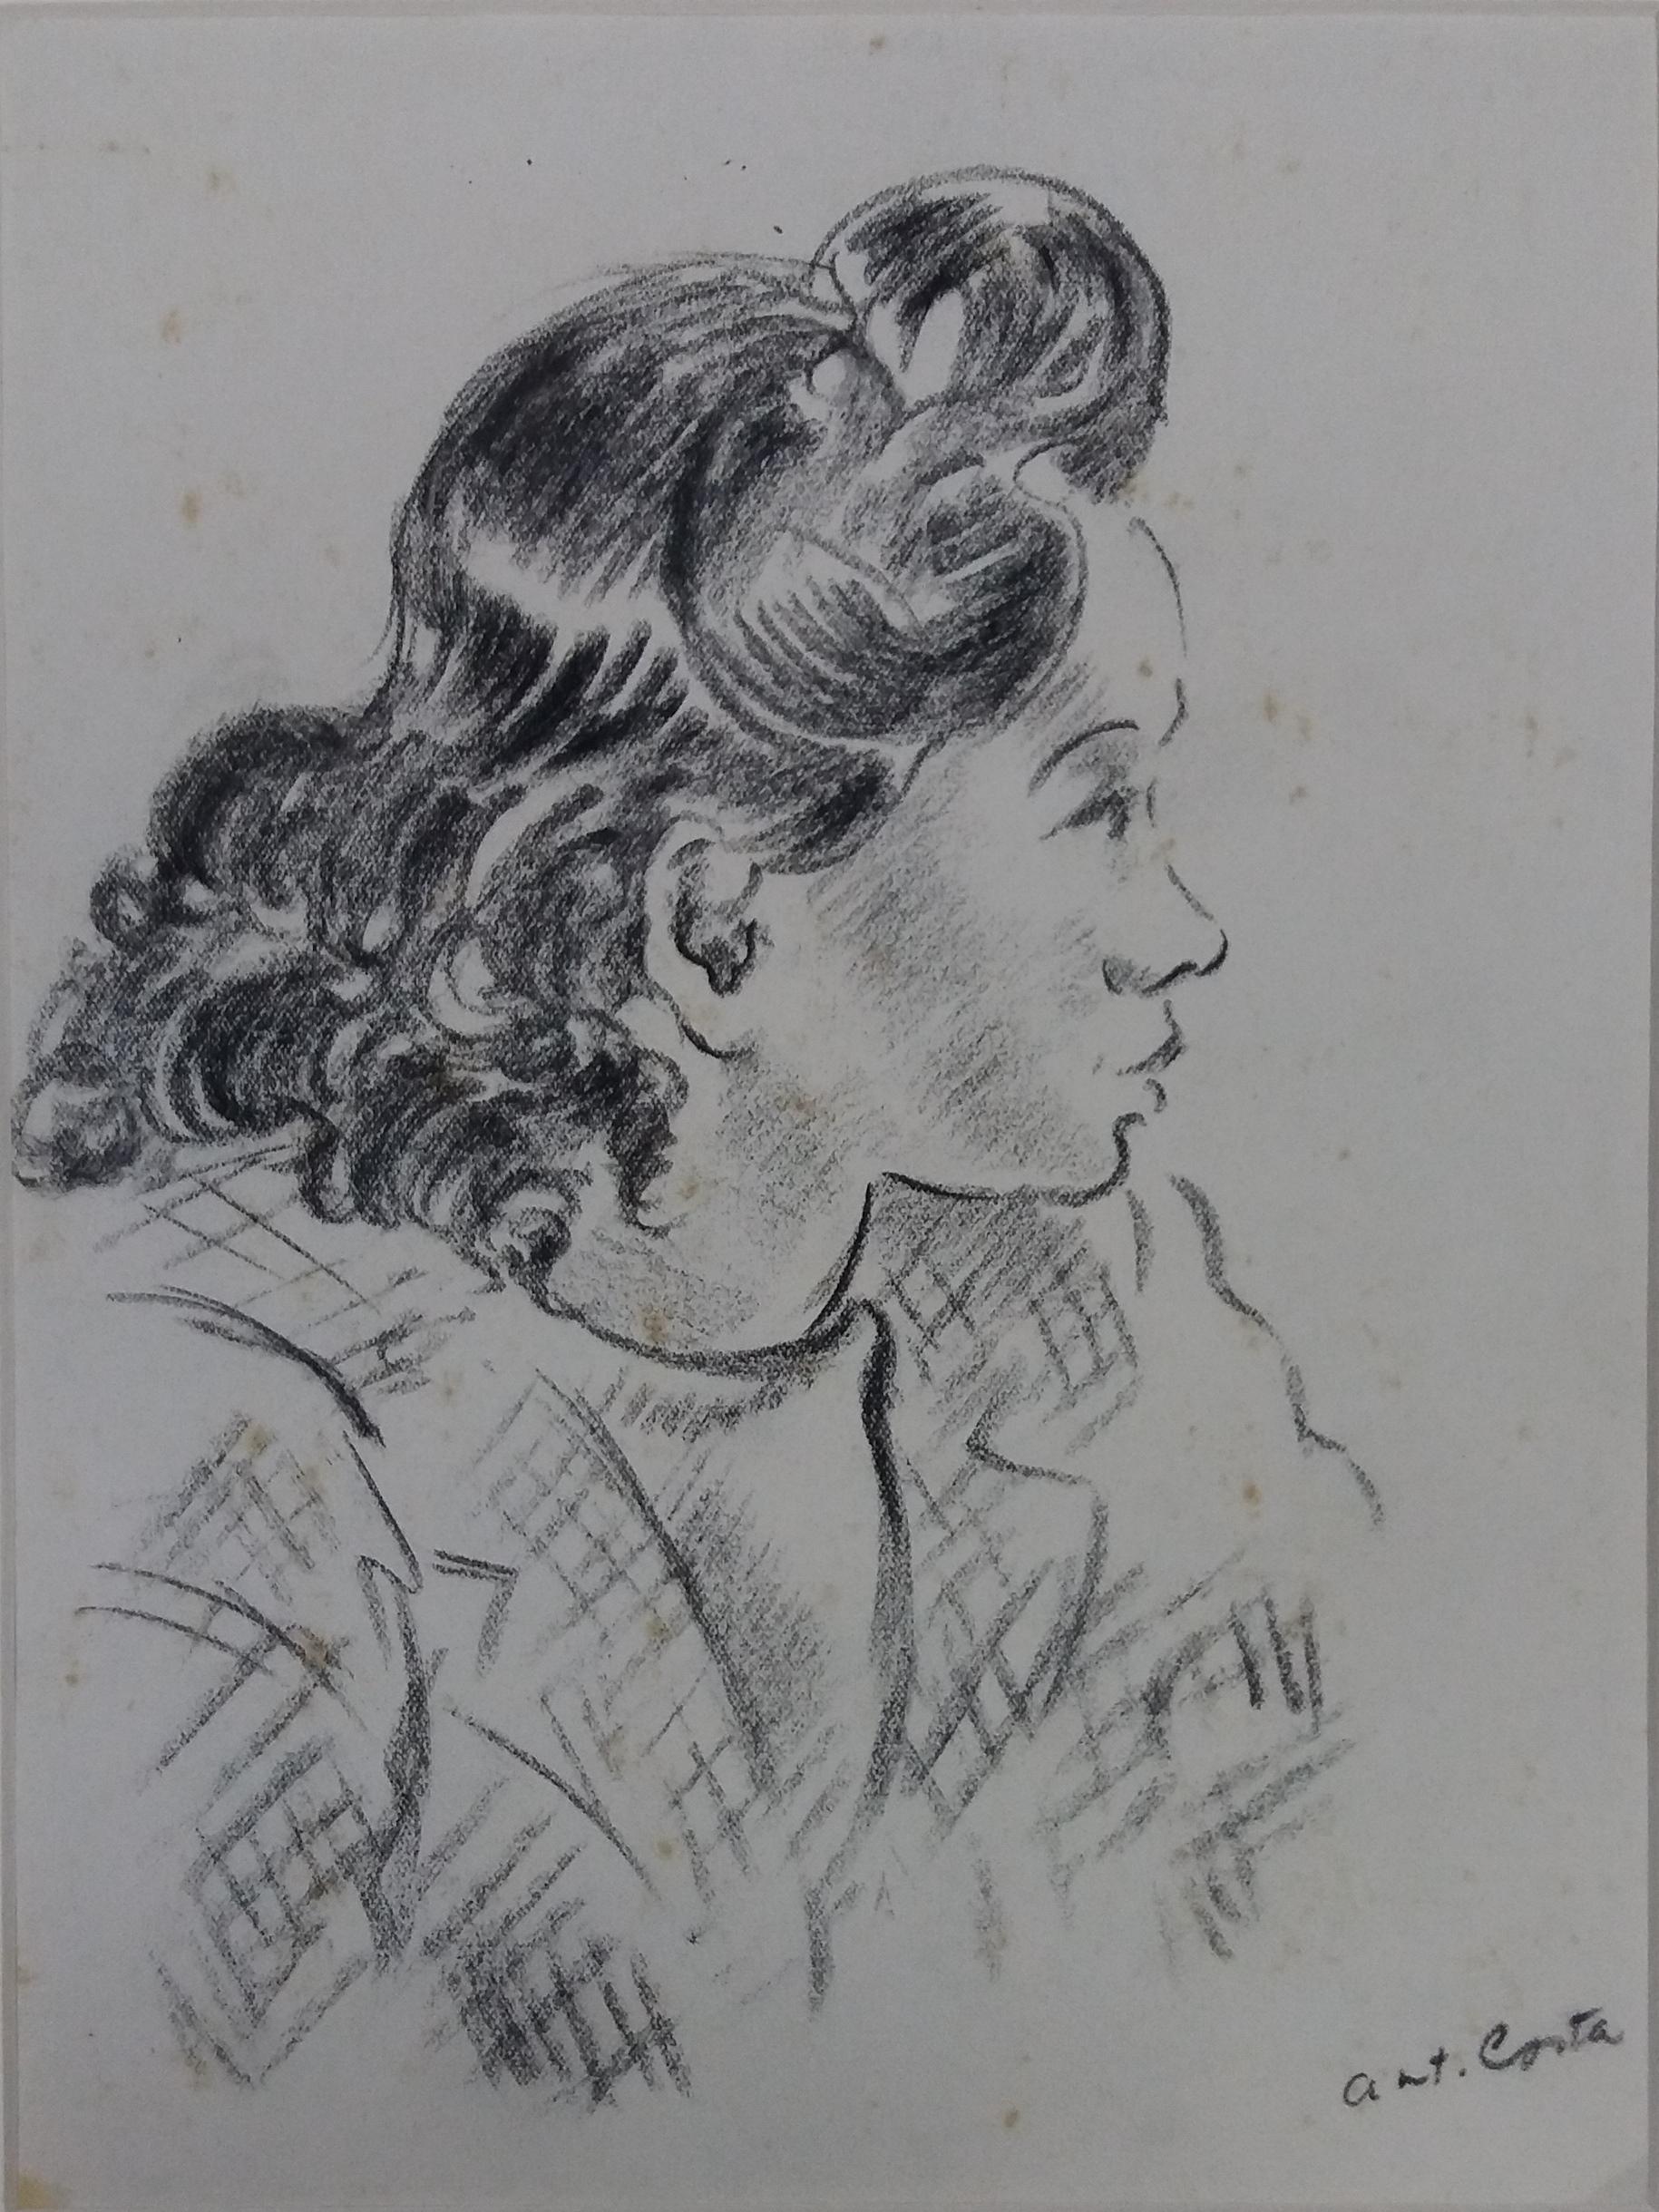 Woman. original figurative academician drawing painting
Barcelona, 1904 - Barcelona, 1965
It was formed in Buenos Aires, in the Circle of San Lucas of Barcelona and the FAD.
He was friend and companion of Joan Sandalines and Sebastià Gasch. From